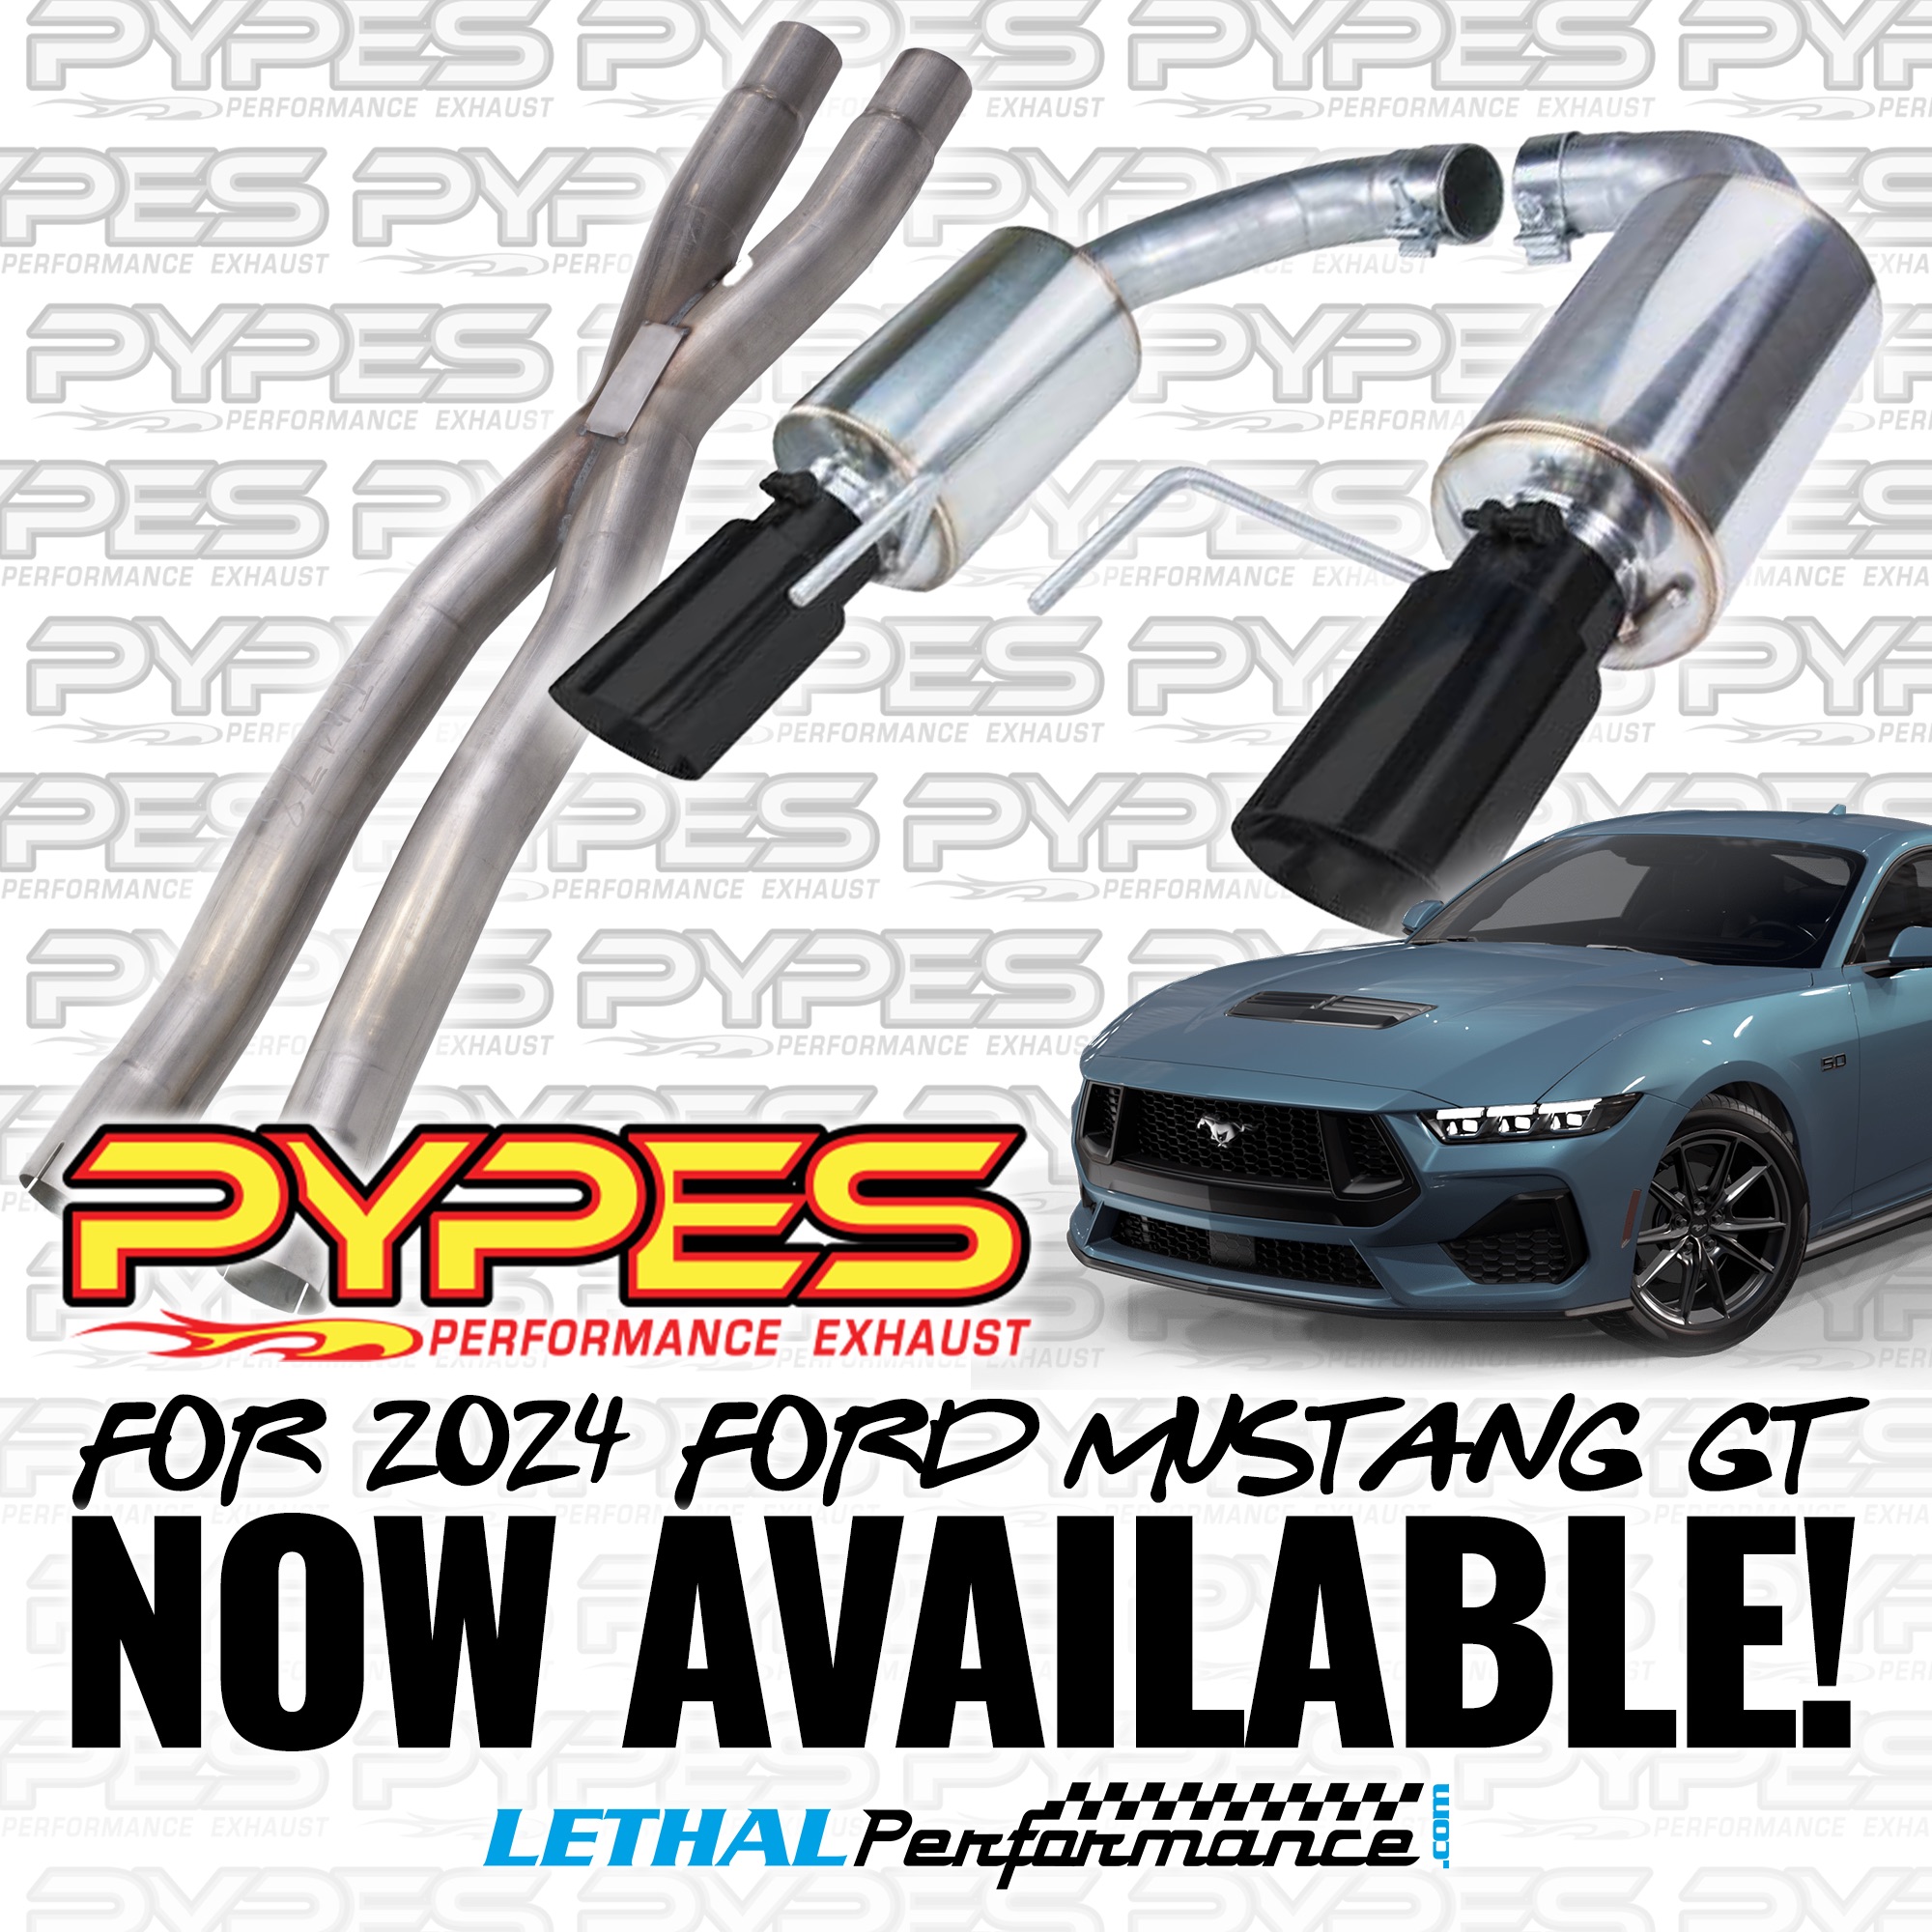 S650 Mustang Pypes Performance Exhaust NOW AVAILABLE for 2024 Mustang!! pypes for 2024 mustang gt 2